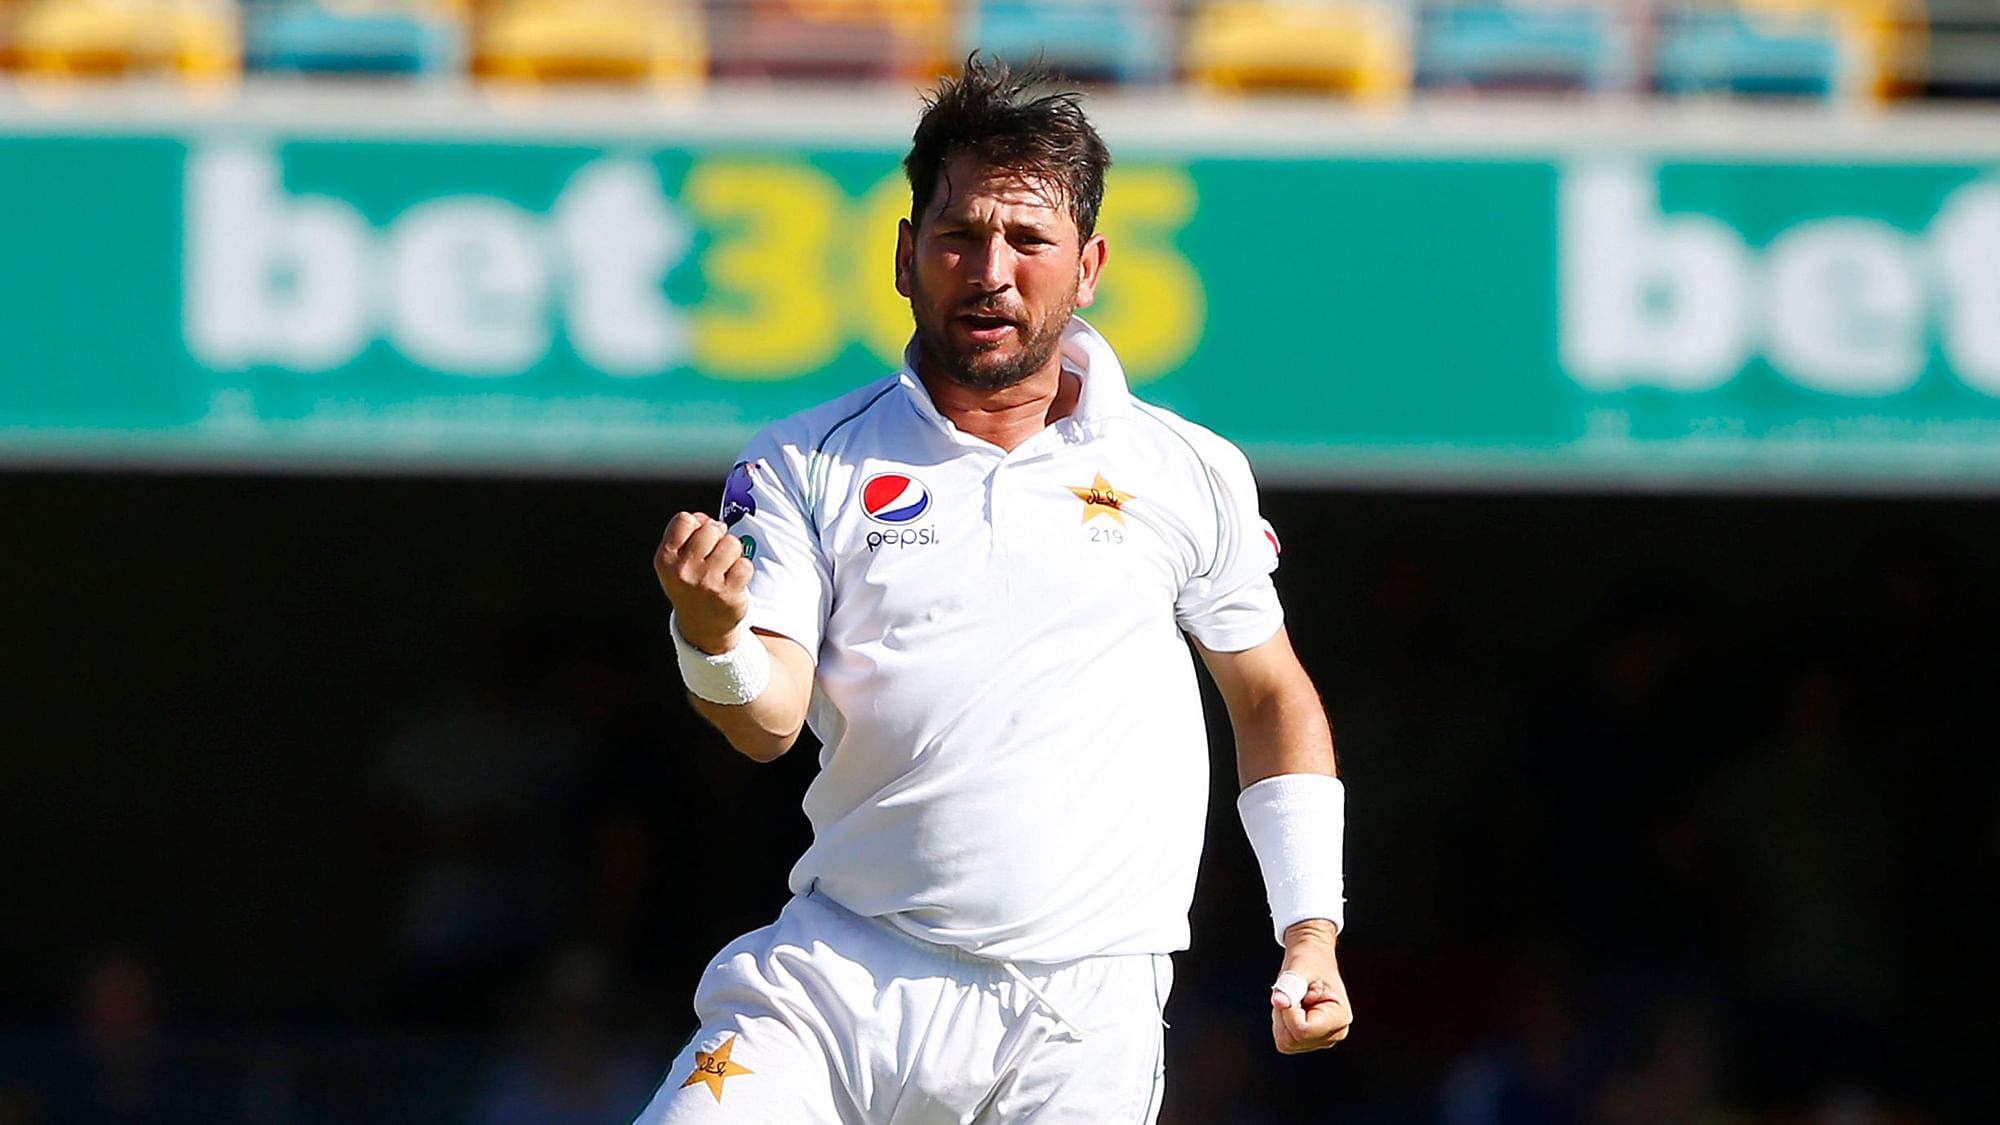 Pakistan bowler Yasir Shah has described his and his teammates’ encounter with an Indian taxi driver in Brisbane.